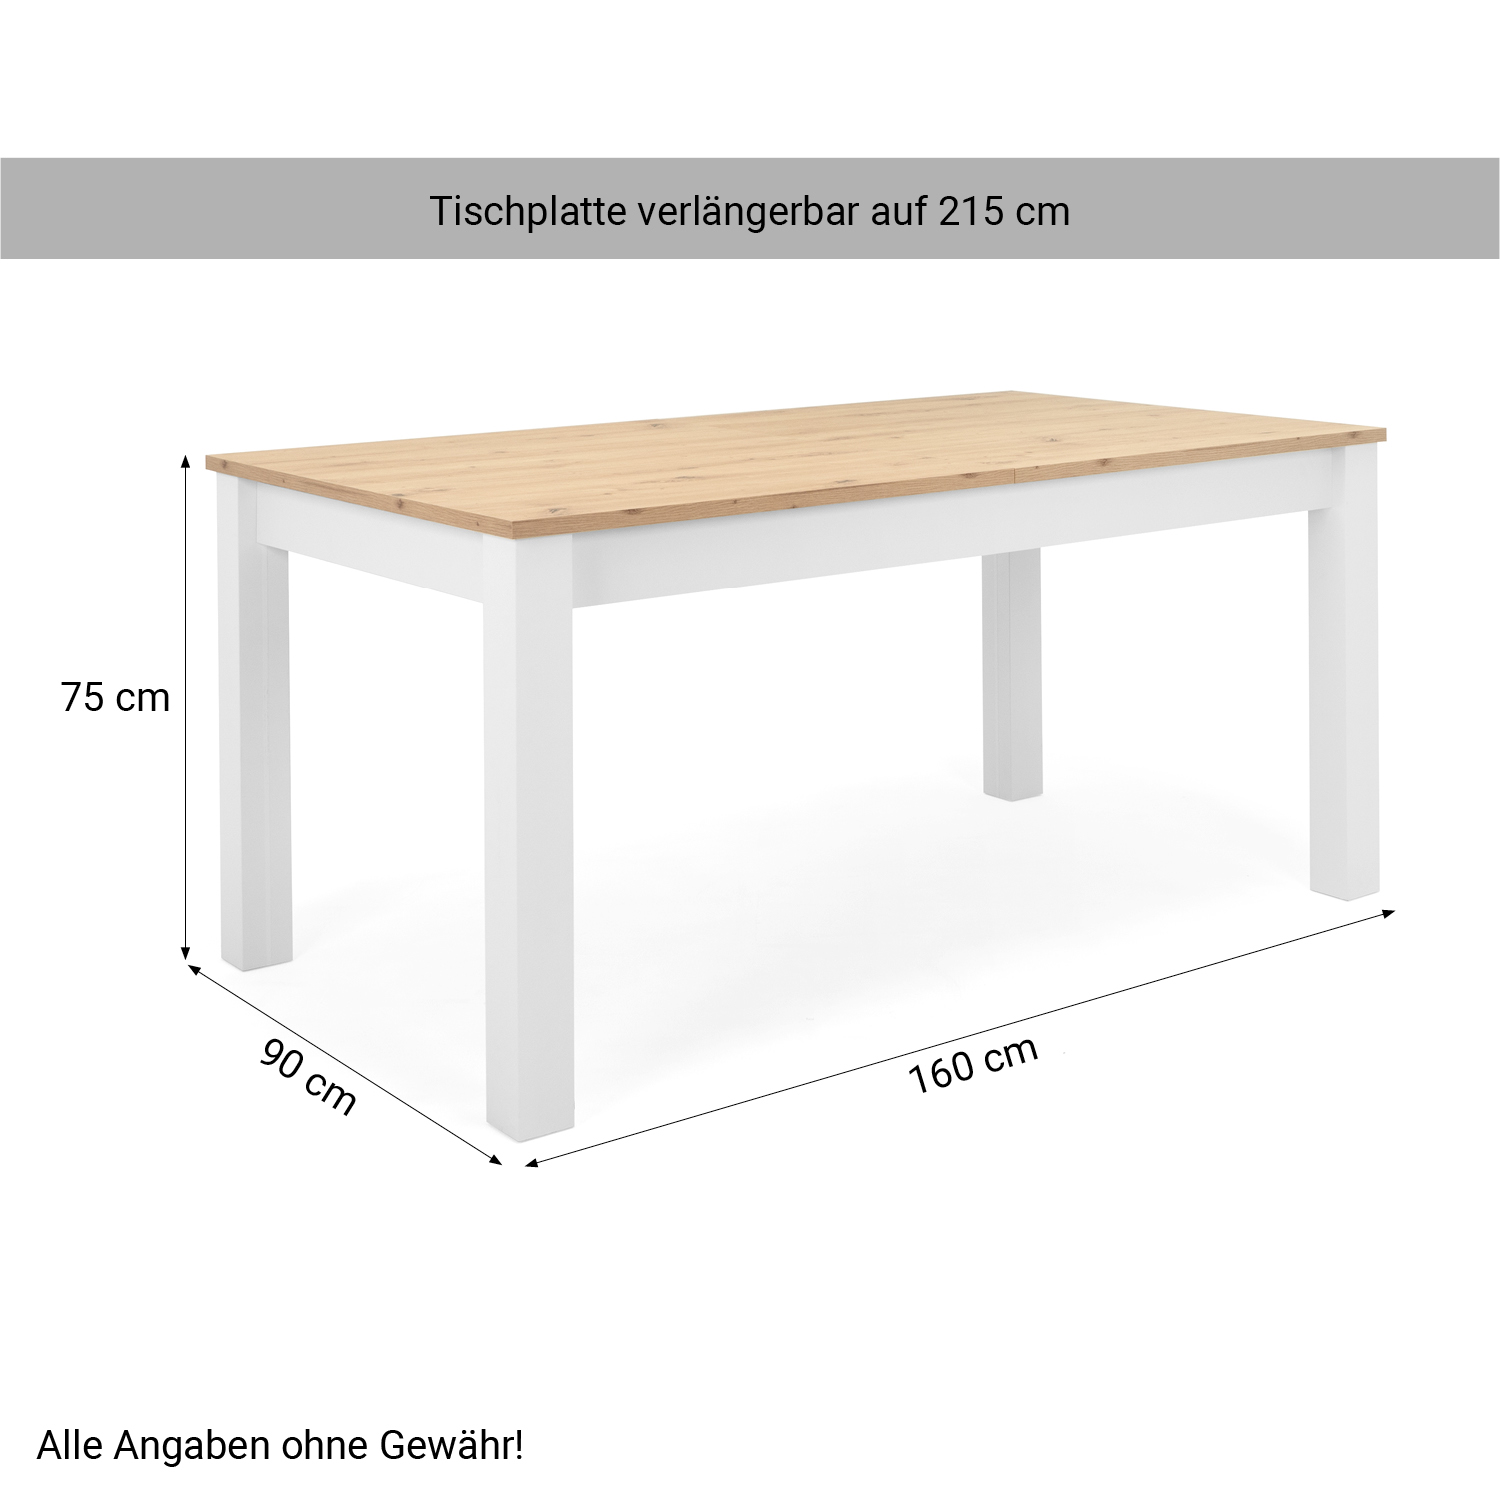 Dining Table Extendable with 4 Chairs Grey Dining Room Table Wooden Table White